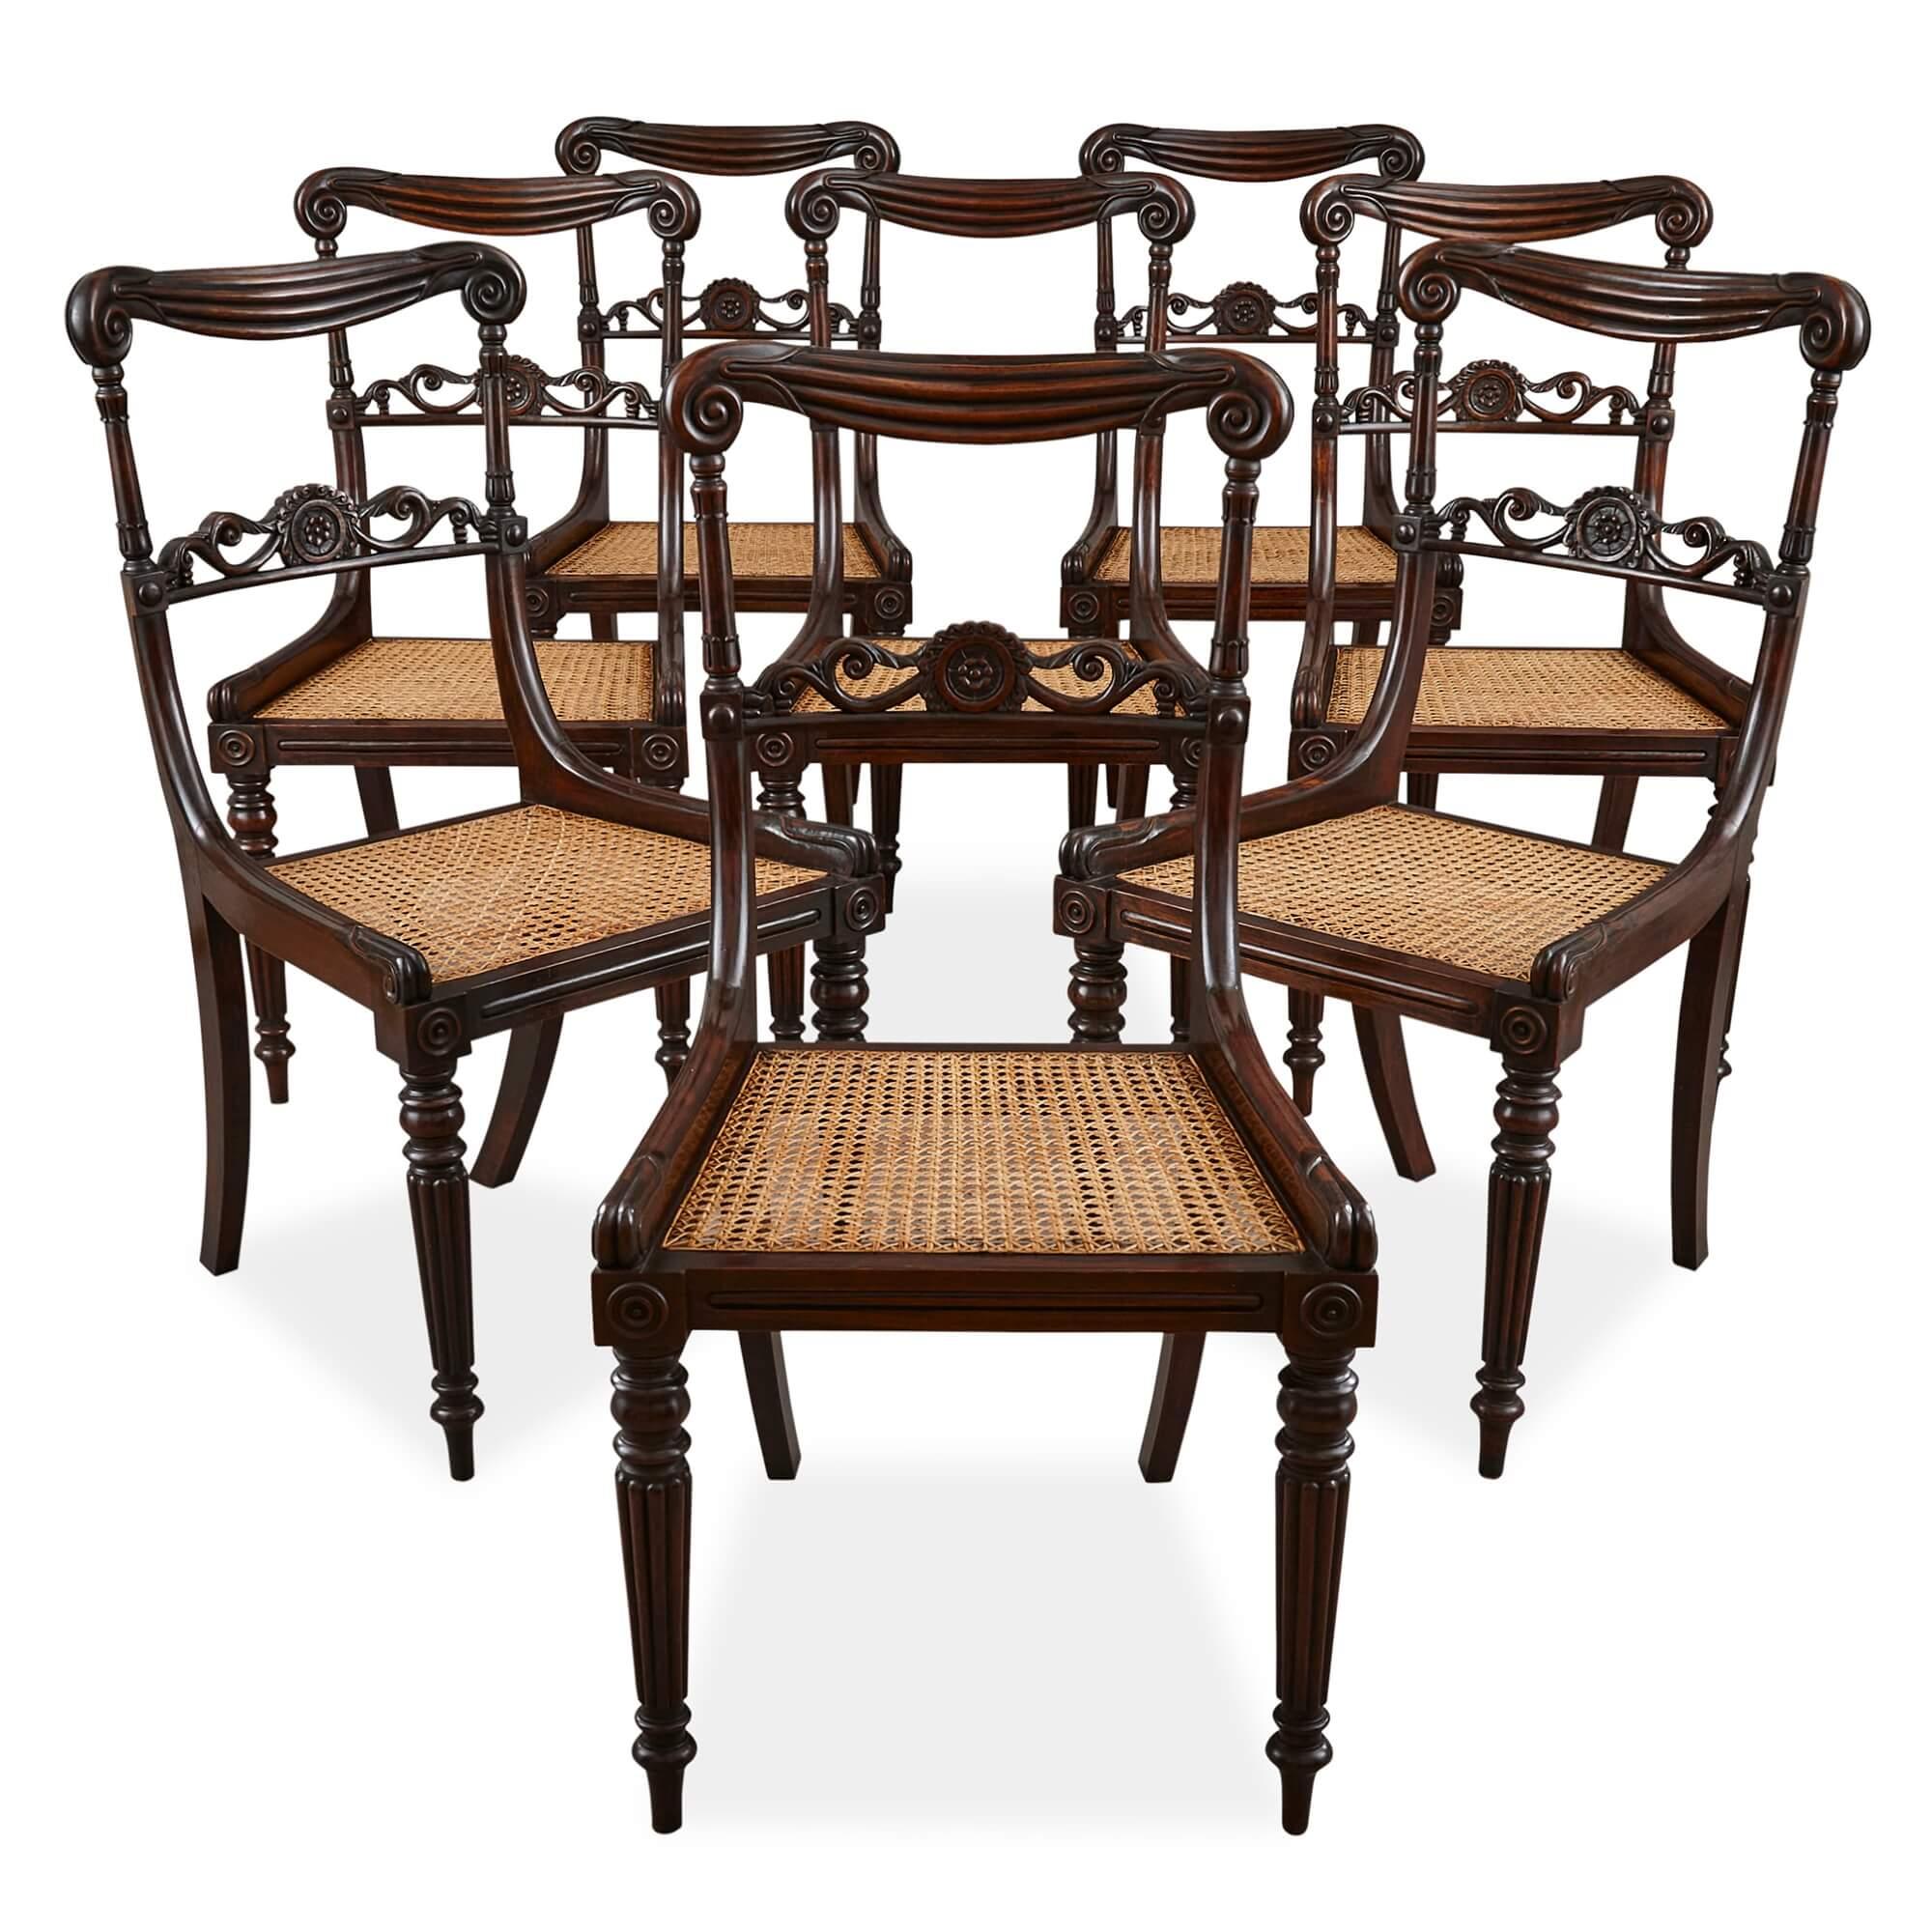 Set of eight antique English late Victorian chairs
English, c.1880
Measures: Height 87cm, width 46cm, depth 48cm

These excellent chairs were crafted in the late nineteenth century in Victorian England, and exemplify the style and sophistication